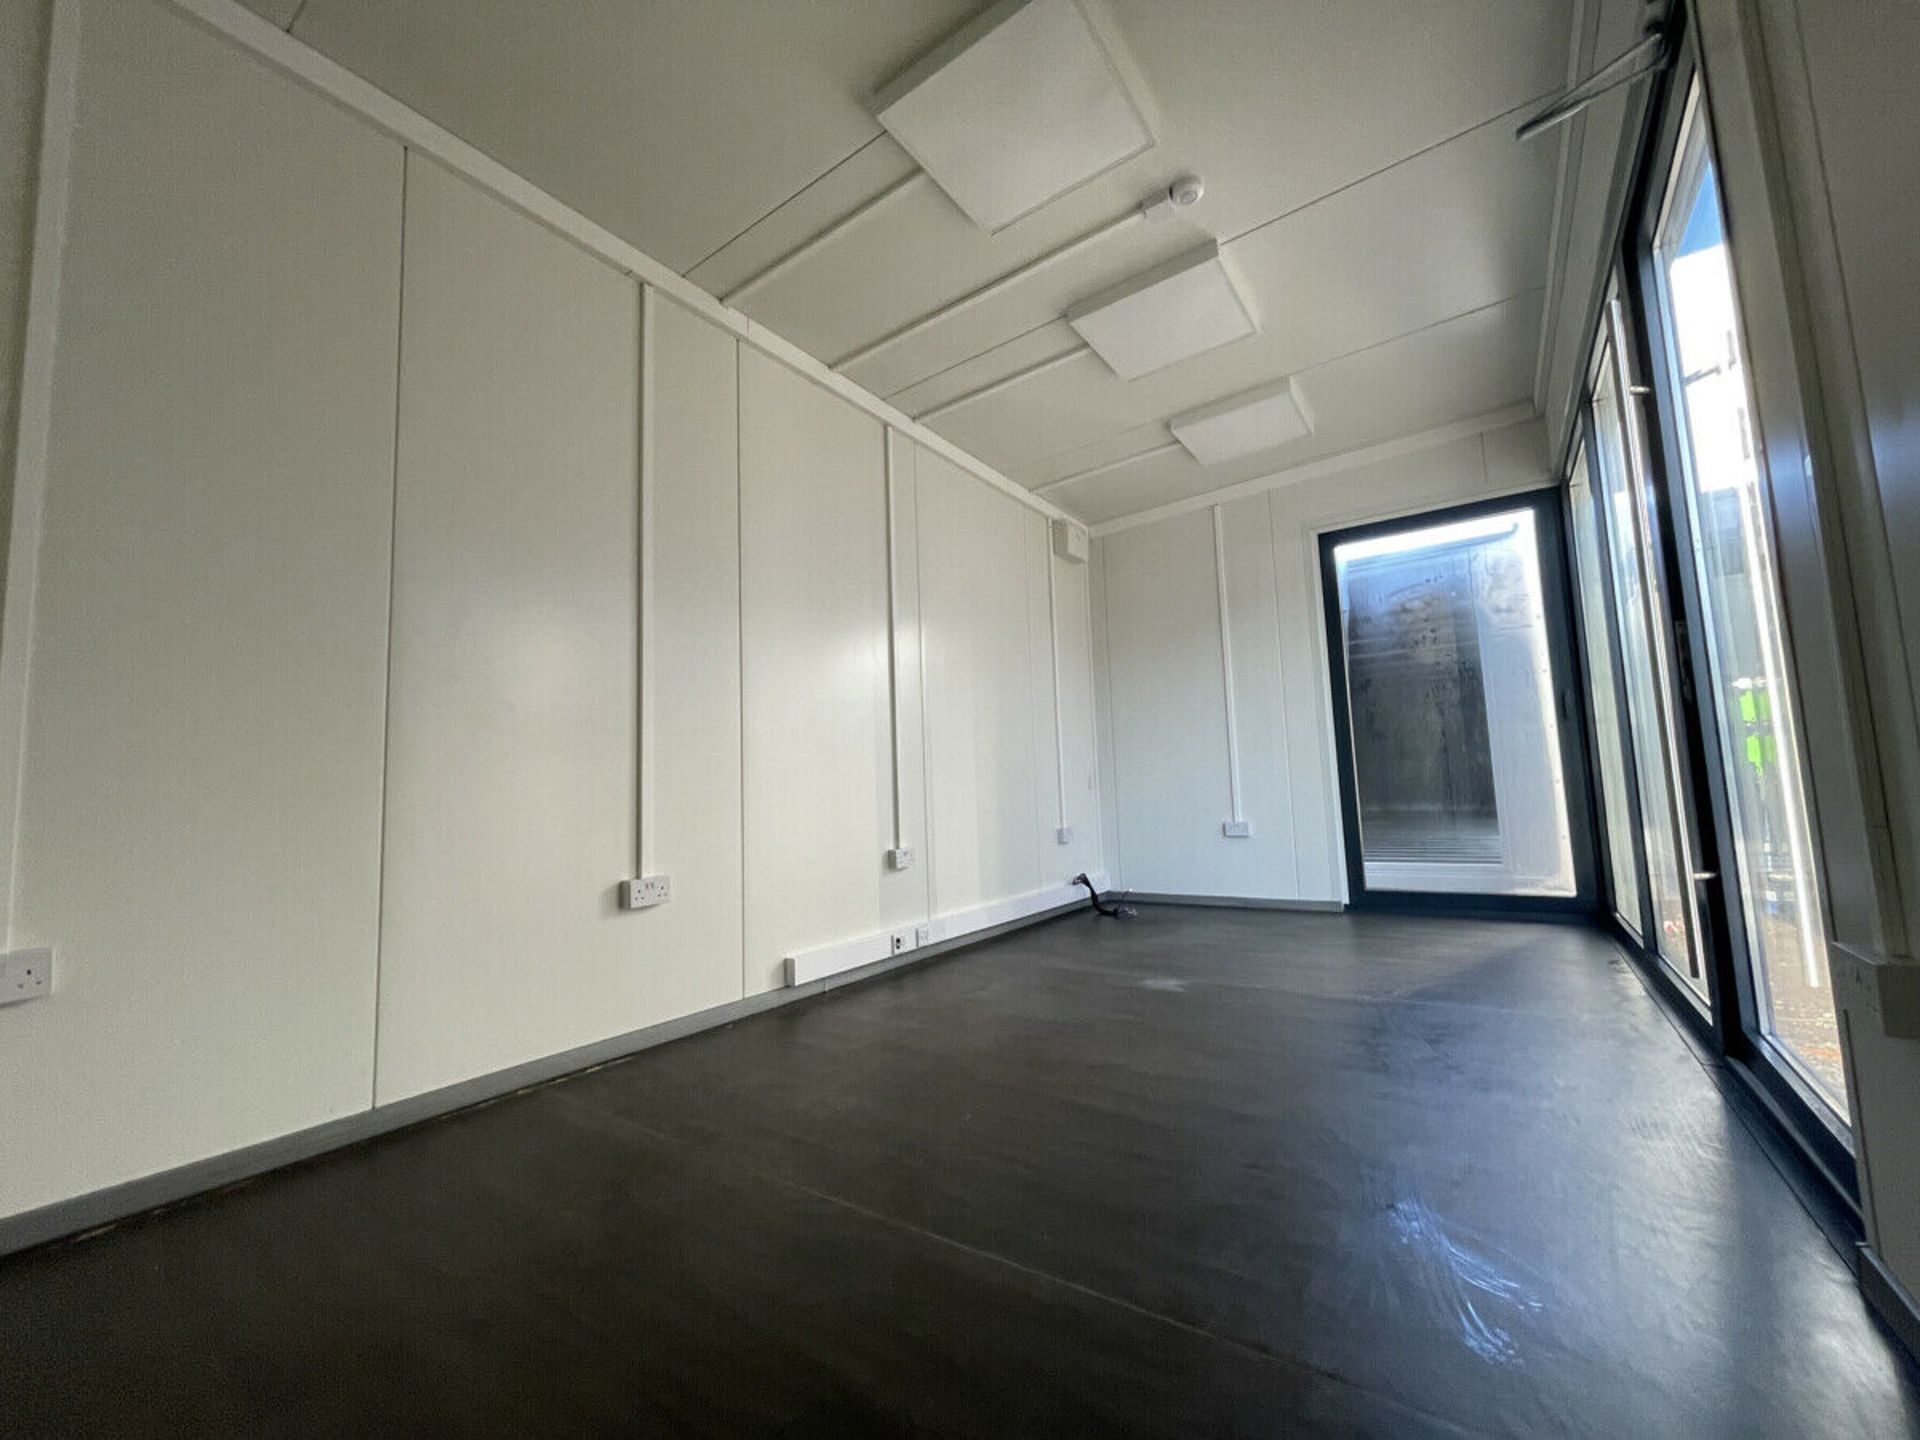 20ft x 10ft Marketing Suite Showroom Sales Office - Image 5 of 8